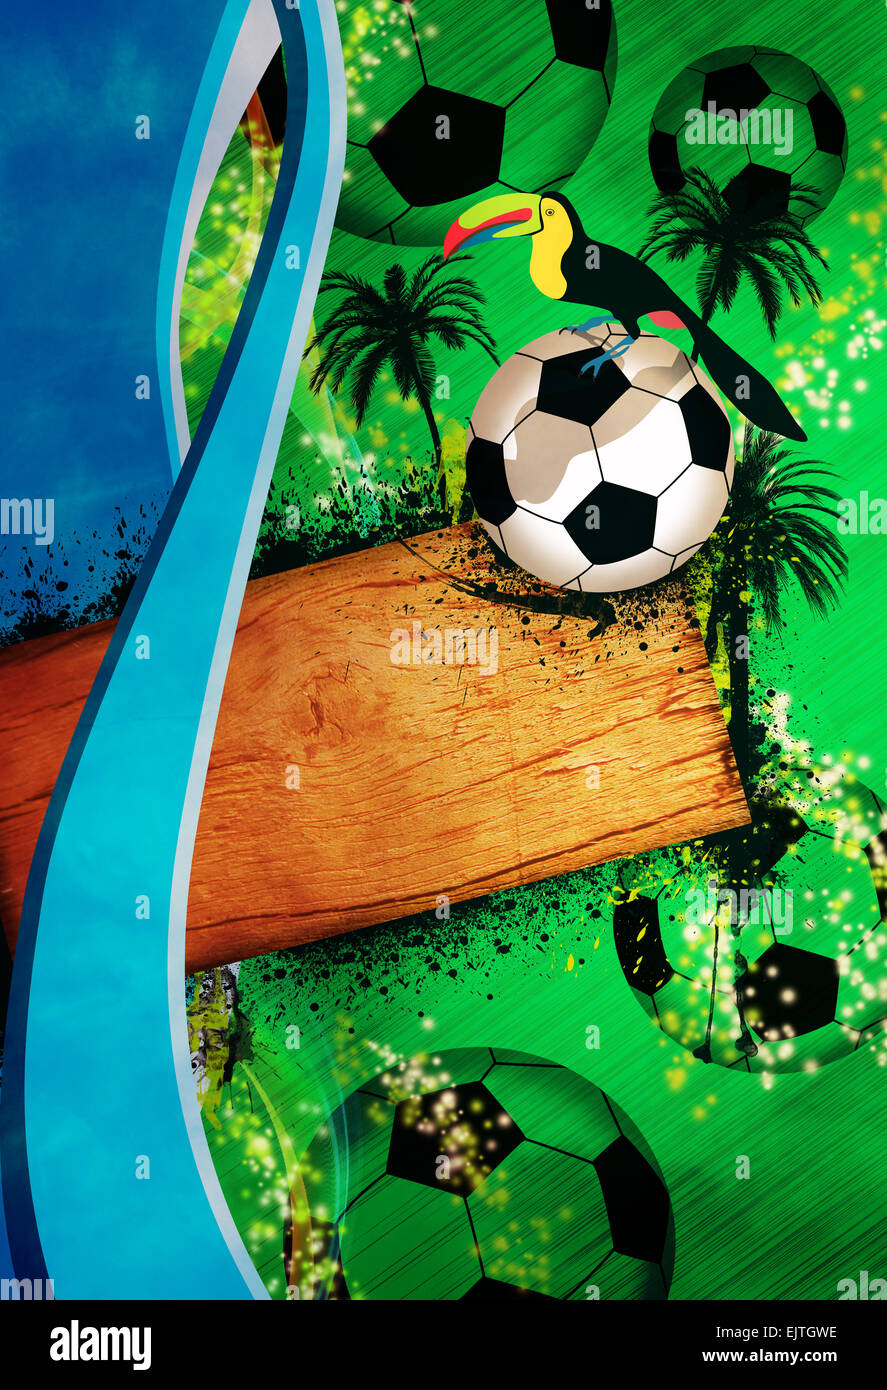 Soccer or football background Poster